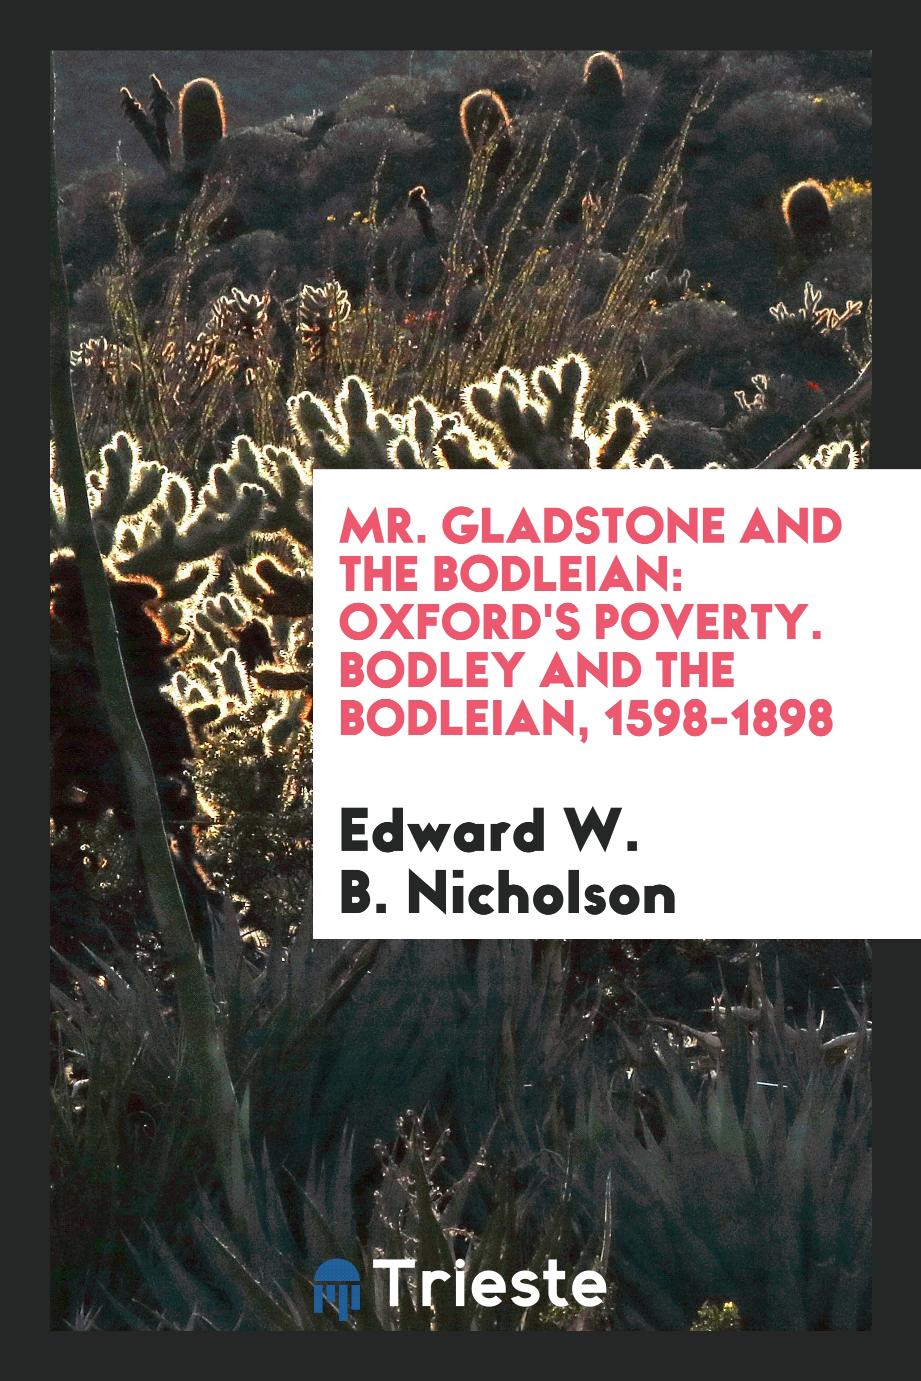 Mr. Gladstone and the Bodleian: Oxford's Poverty. Bodley and the Bodleian, 1598-1898